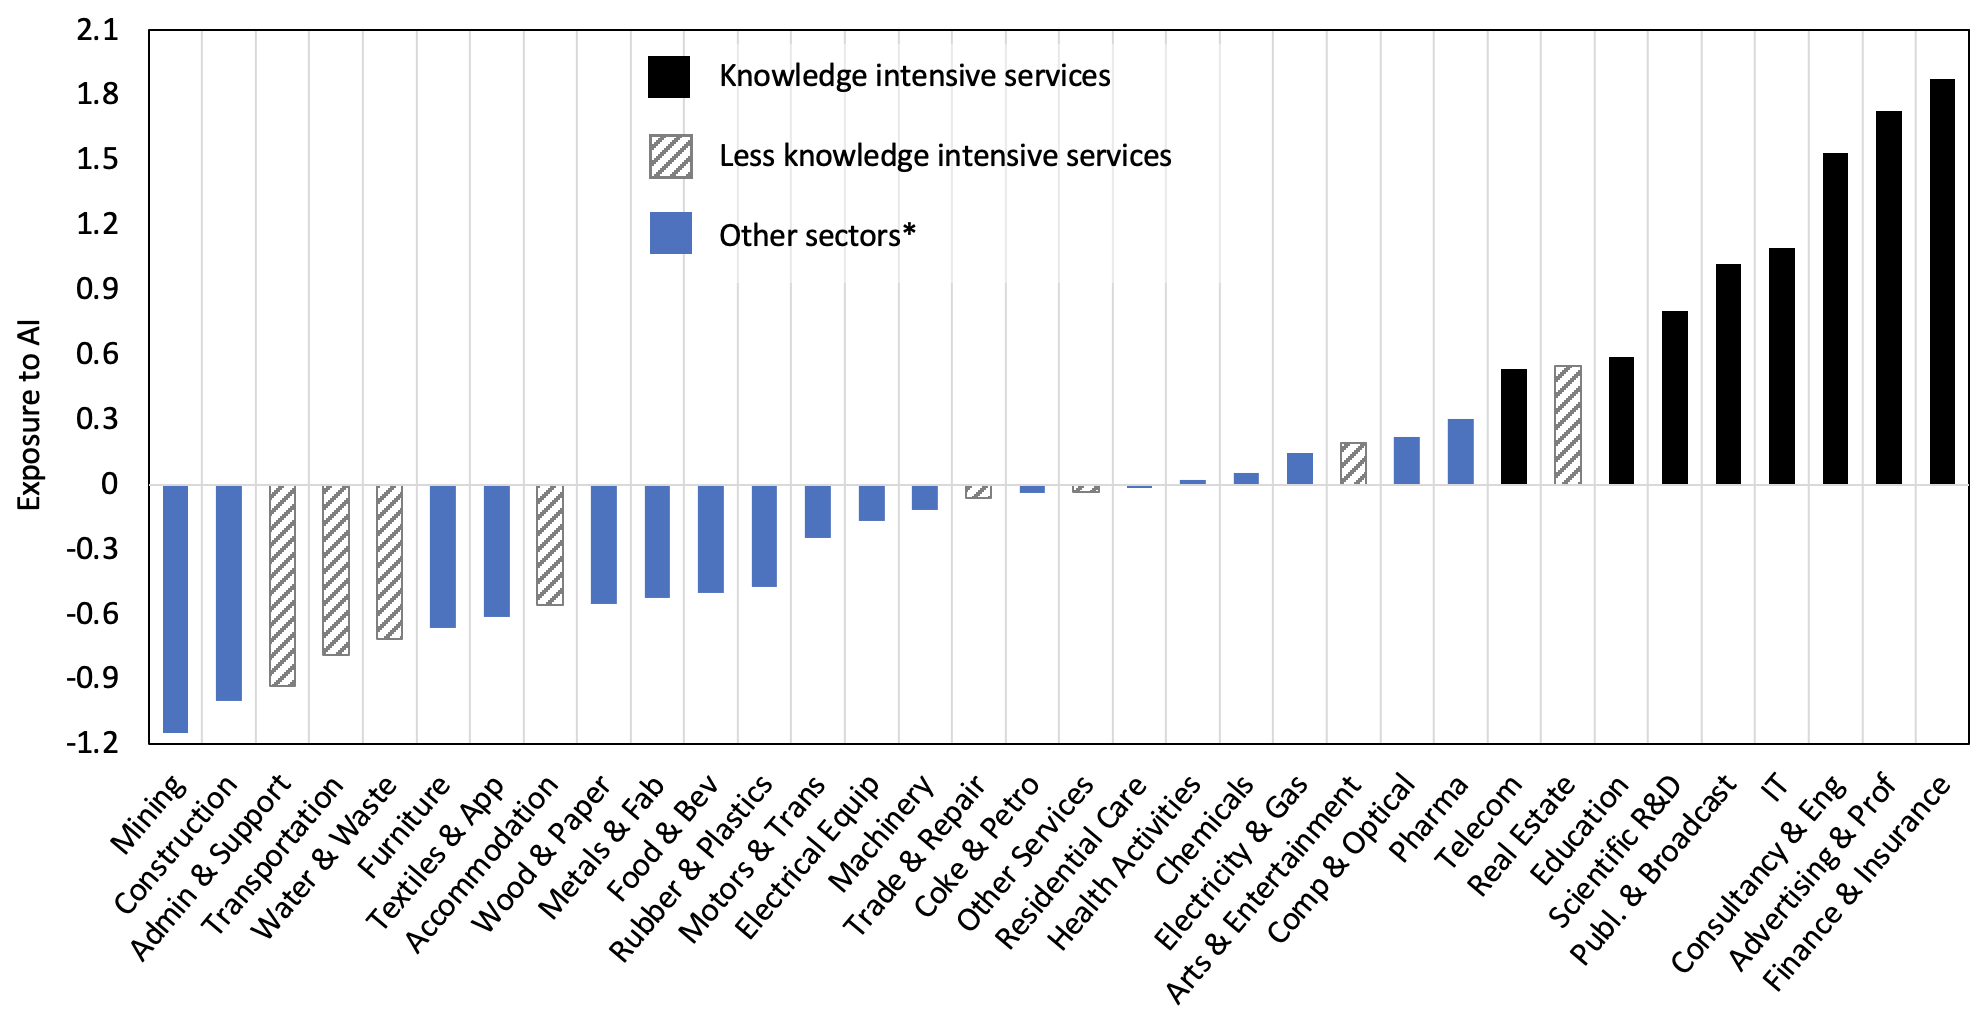 Figure 3 High-productivity and knowledge-intensive services are most affected by AI